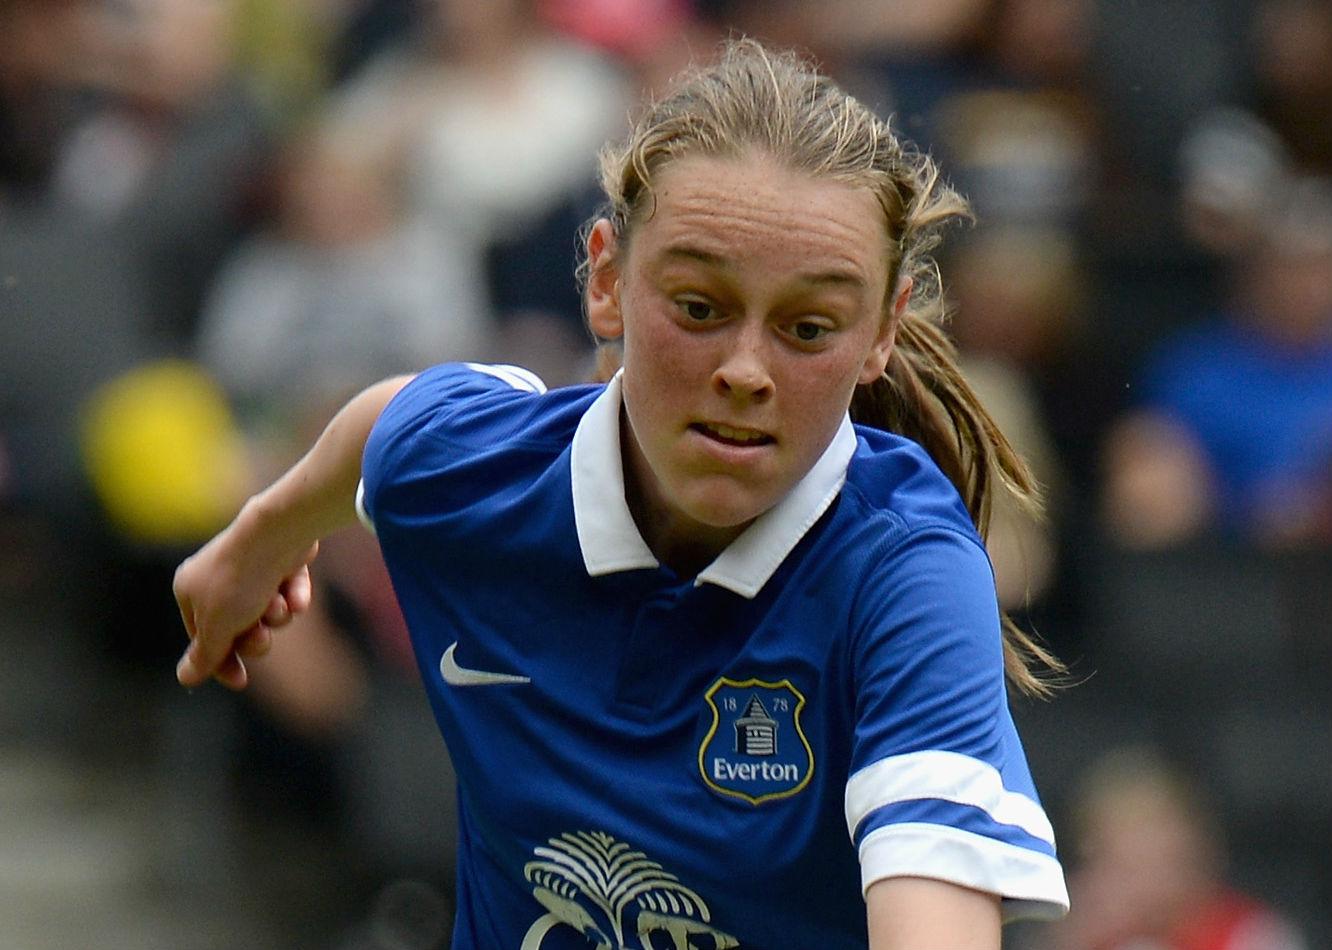 Miss Tynan, from Mossley Hill, Liverpool, began her career at the age of six at Liverpool Feds before moving on to Everton's Centre of Excellence